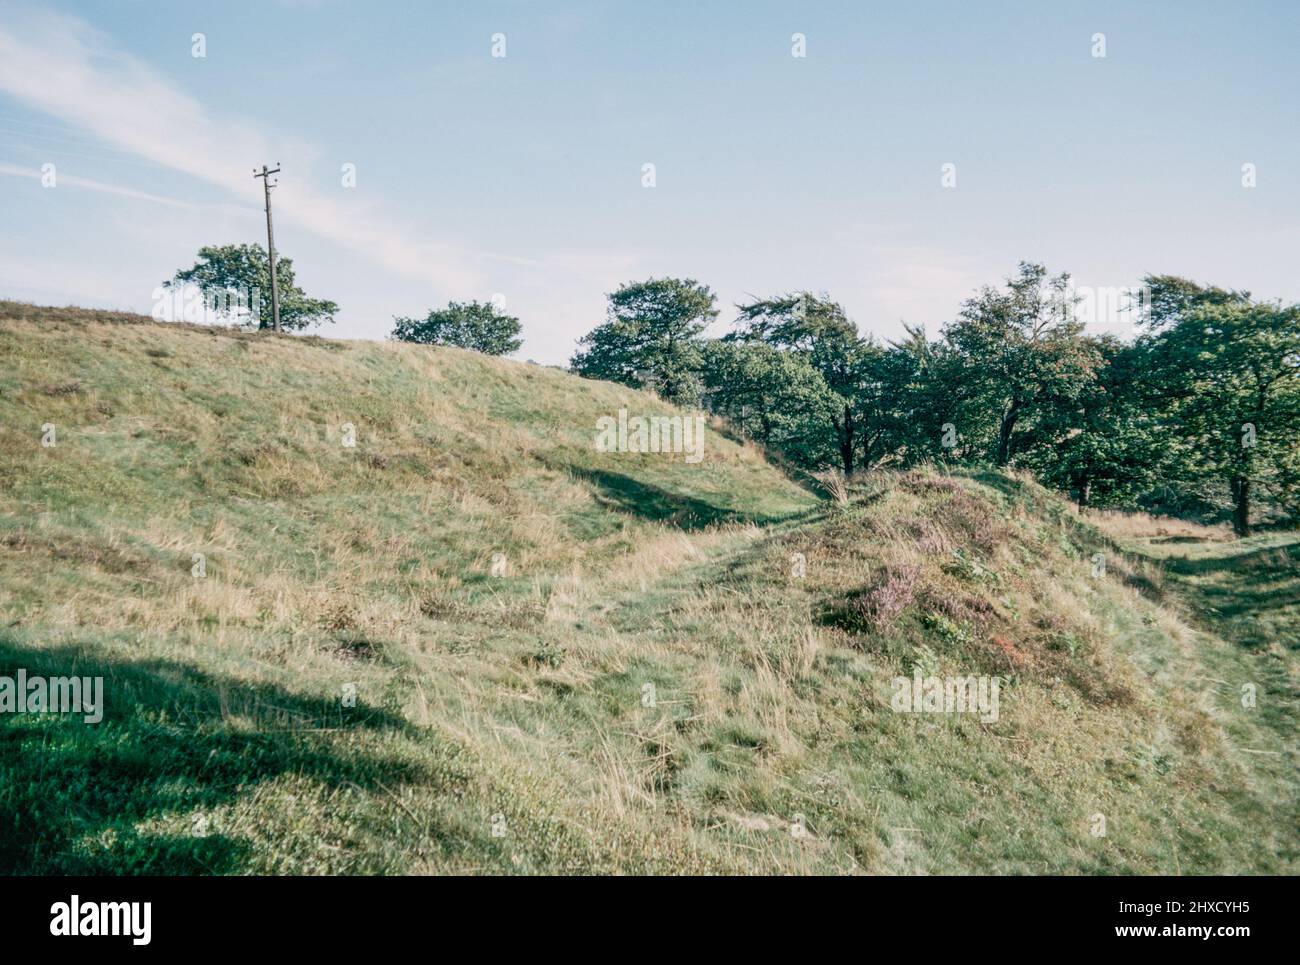 Rough Castle Fort remains - a Roman fort on the Antonine Wall roughly 2 kilometres south east of Bonnybridge near Tamfourhill in the Falkirk council area, Scotland. Archival scan from a slide. September 1972. Stock Photo